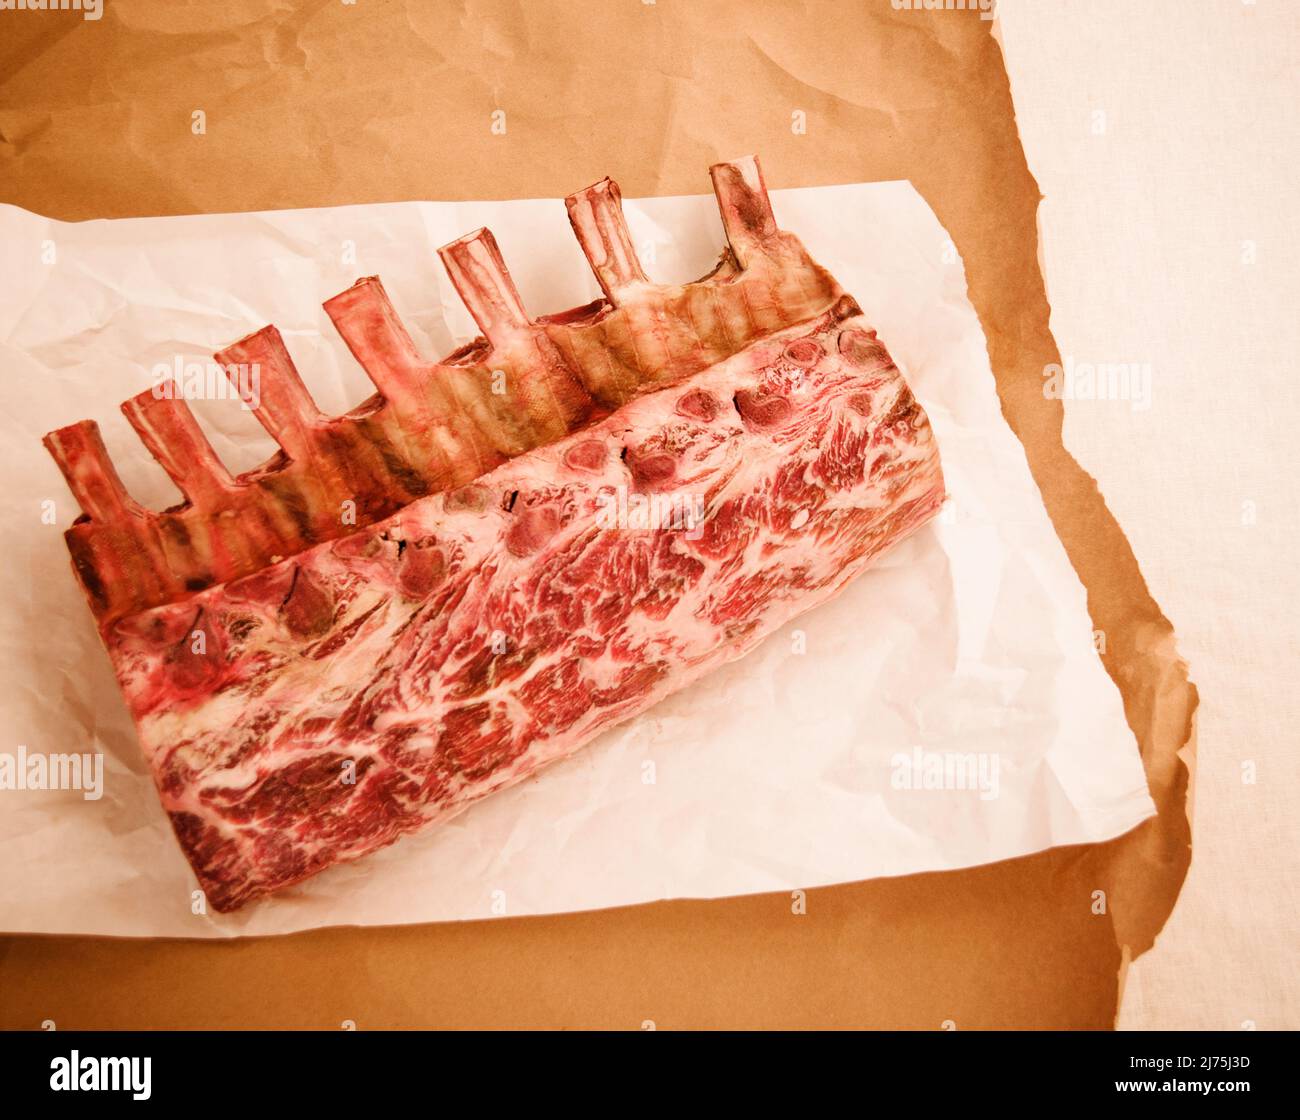 Raw aged Frenched prime rib roast on butcher paper Stock Photo